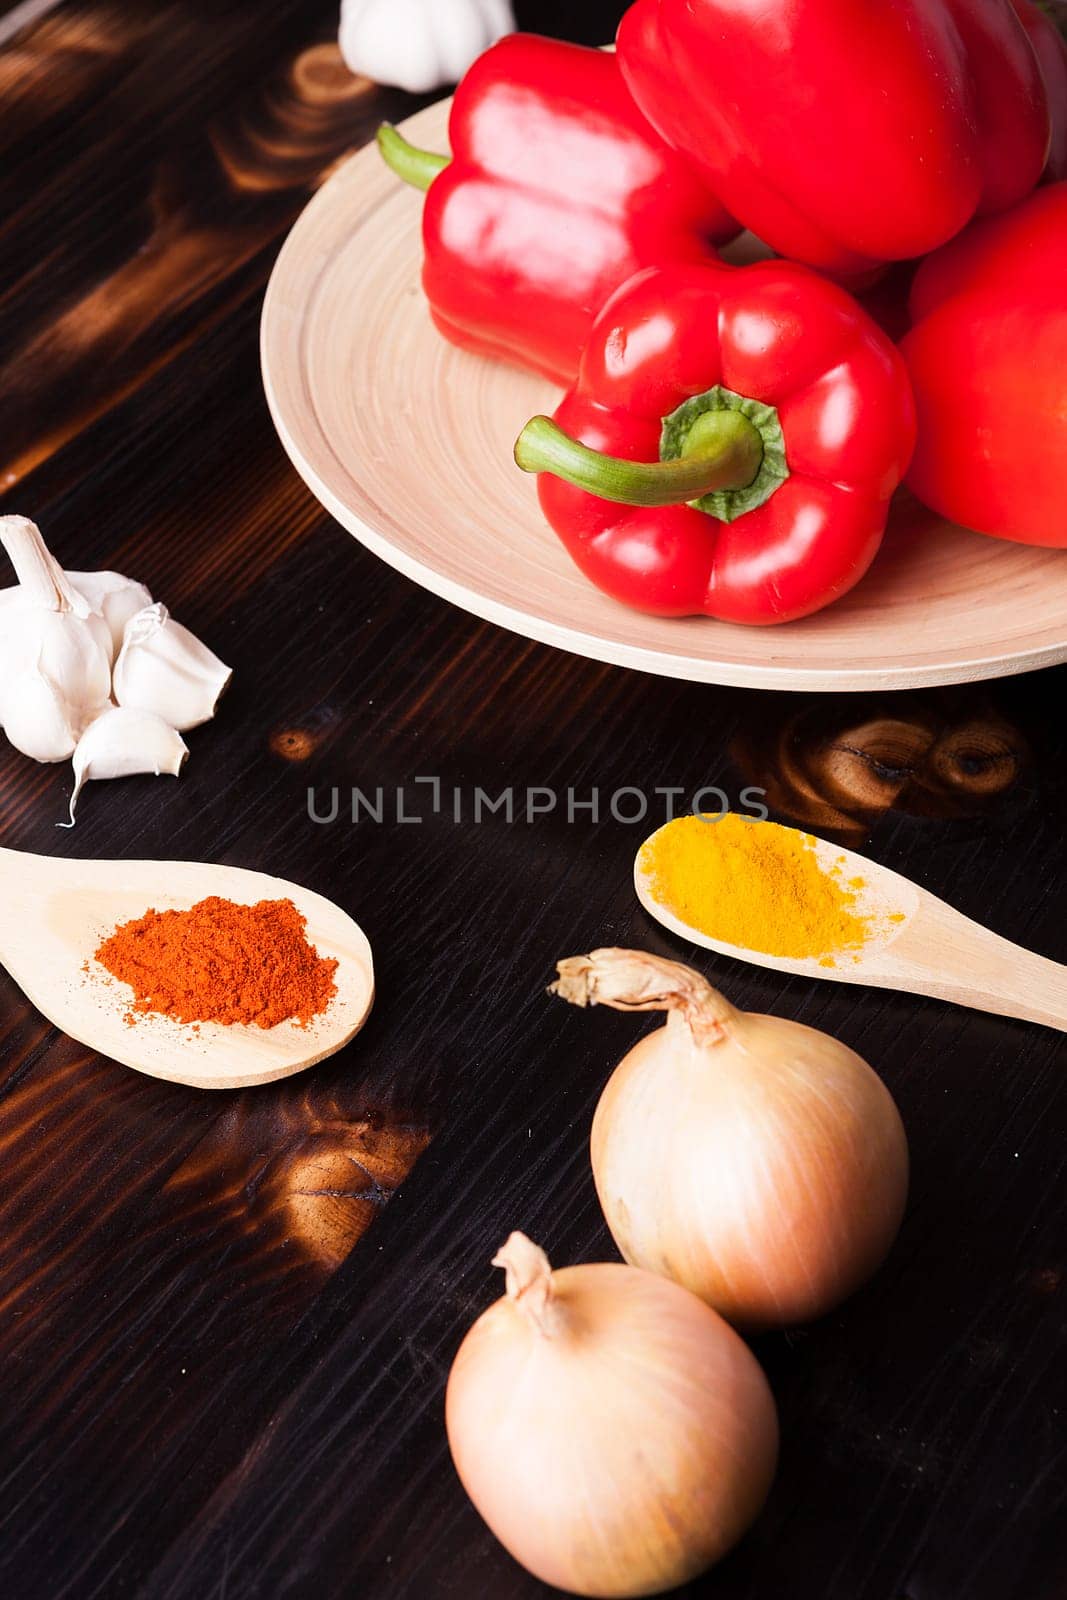 Vegetables and powder spices on burned wooden board